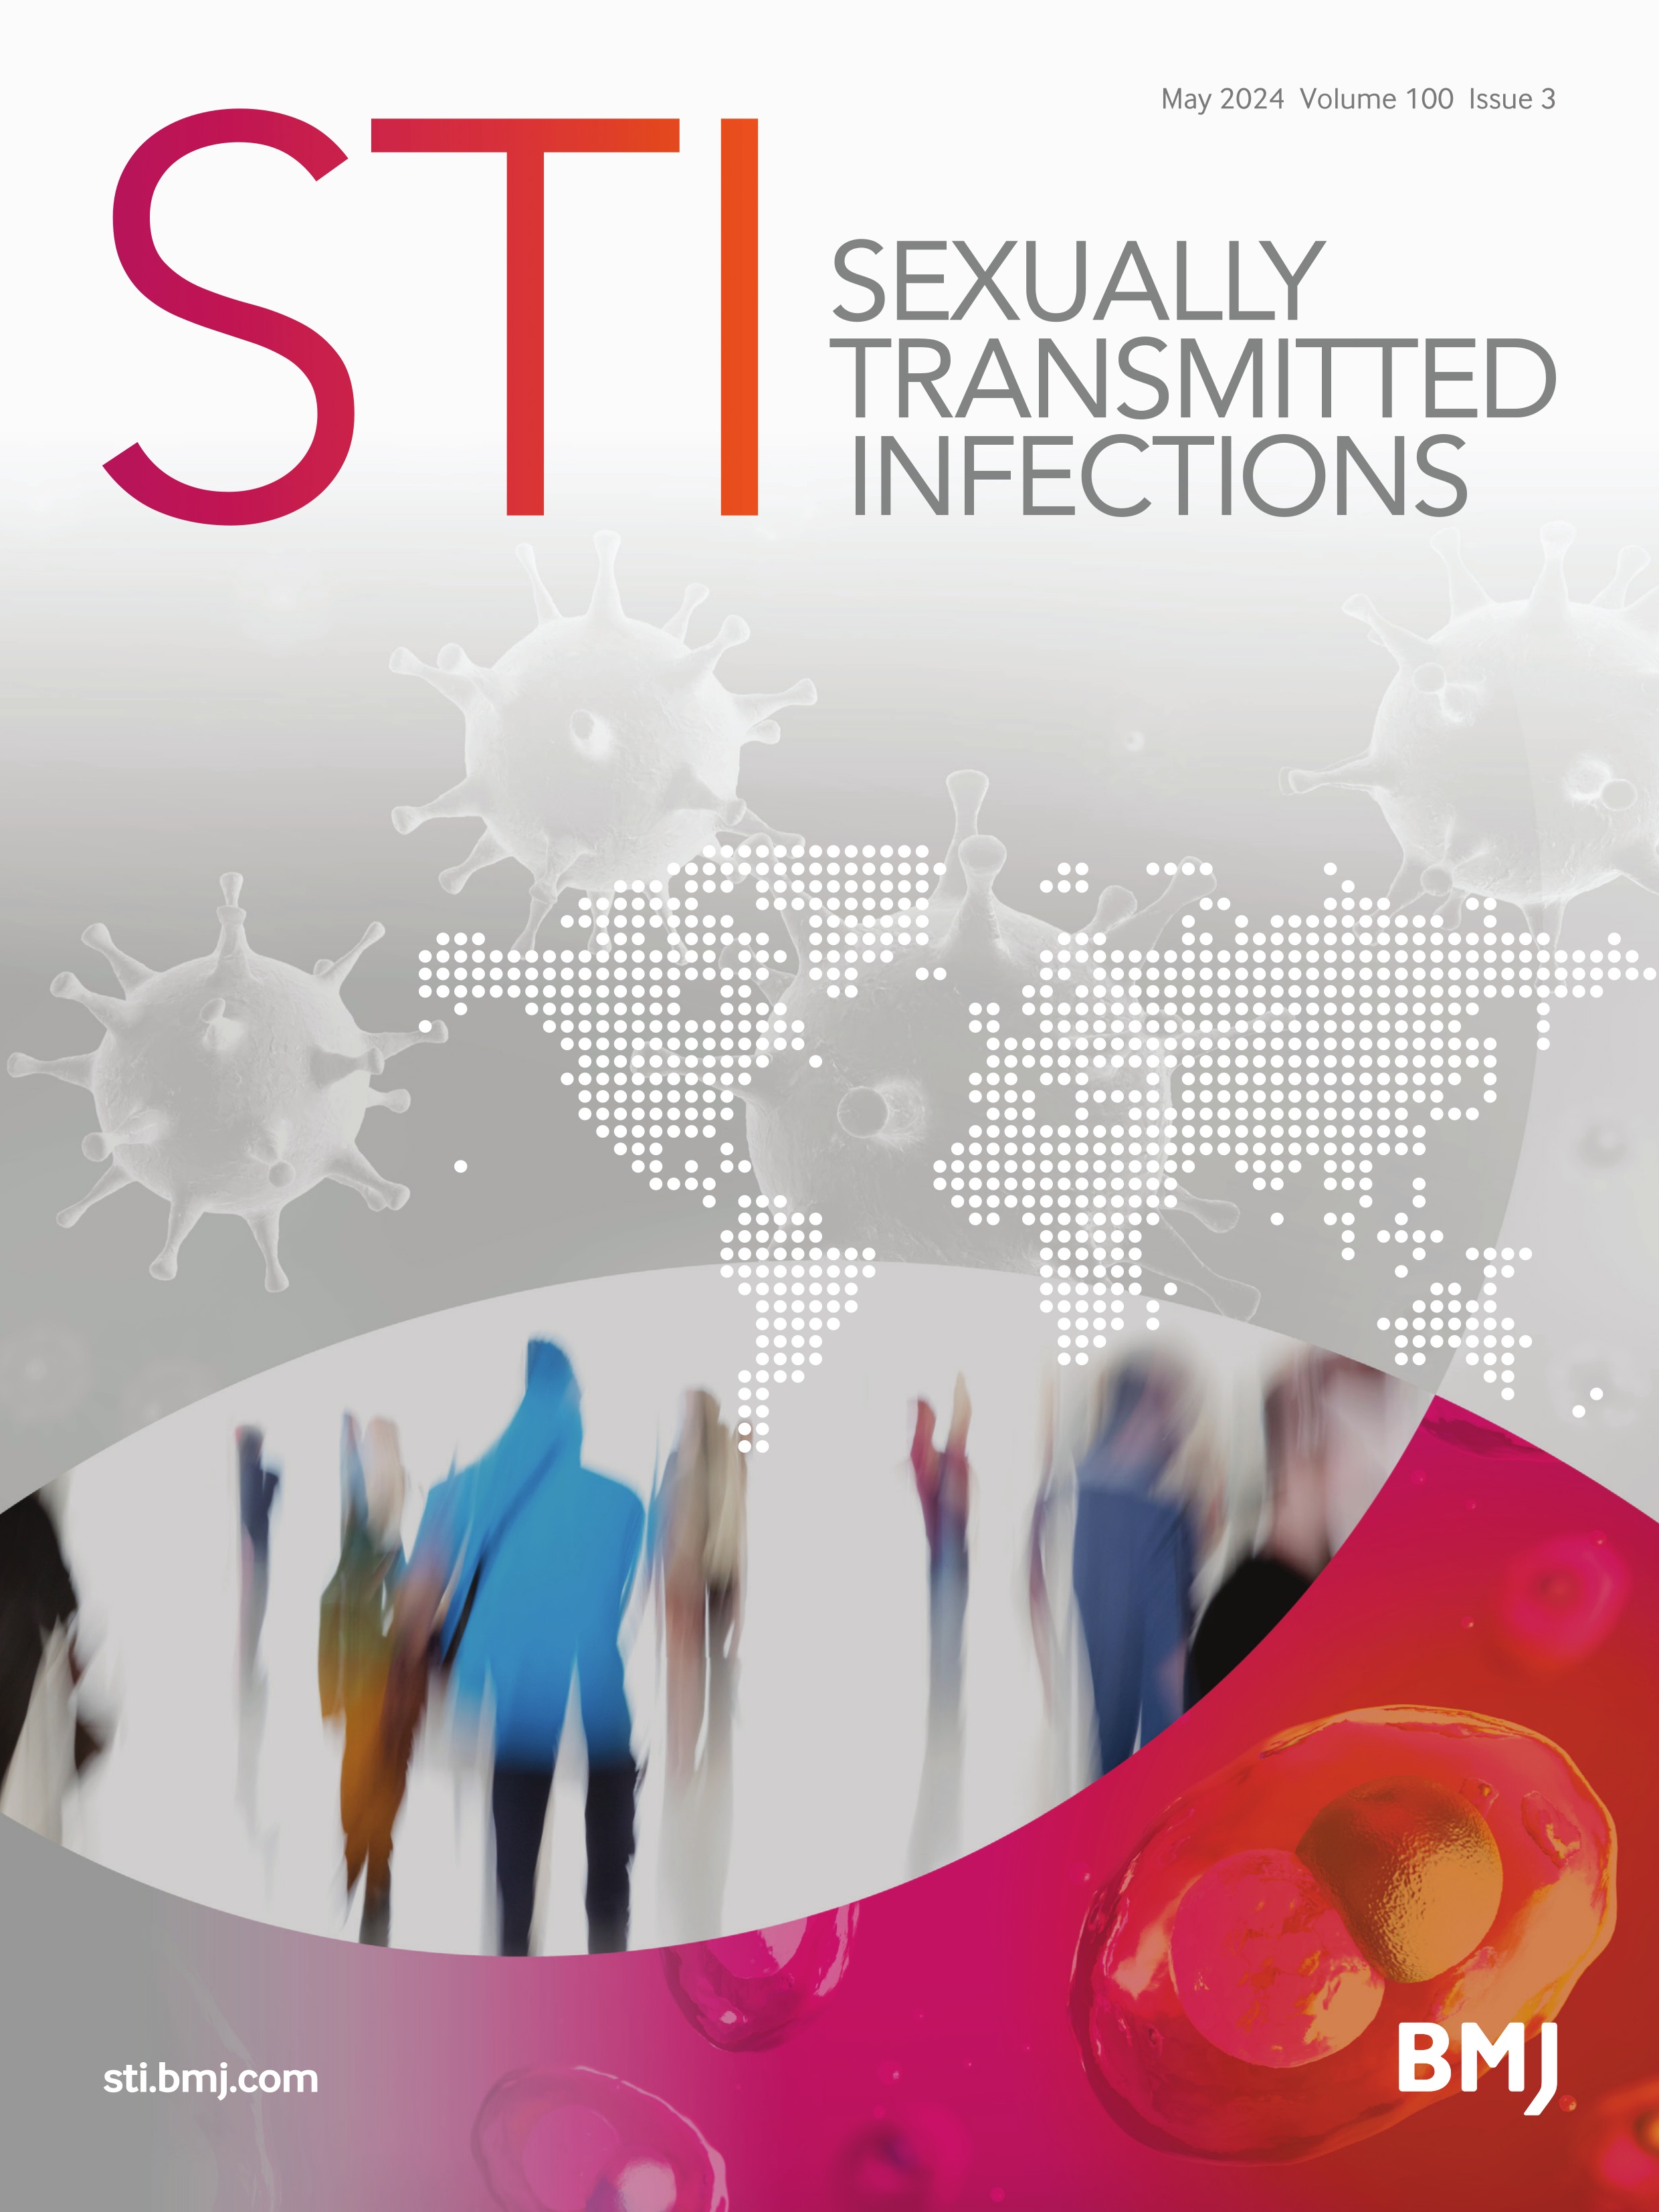 Chemsex and risk of sexually transmitted infections: a perspective from India